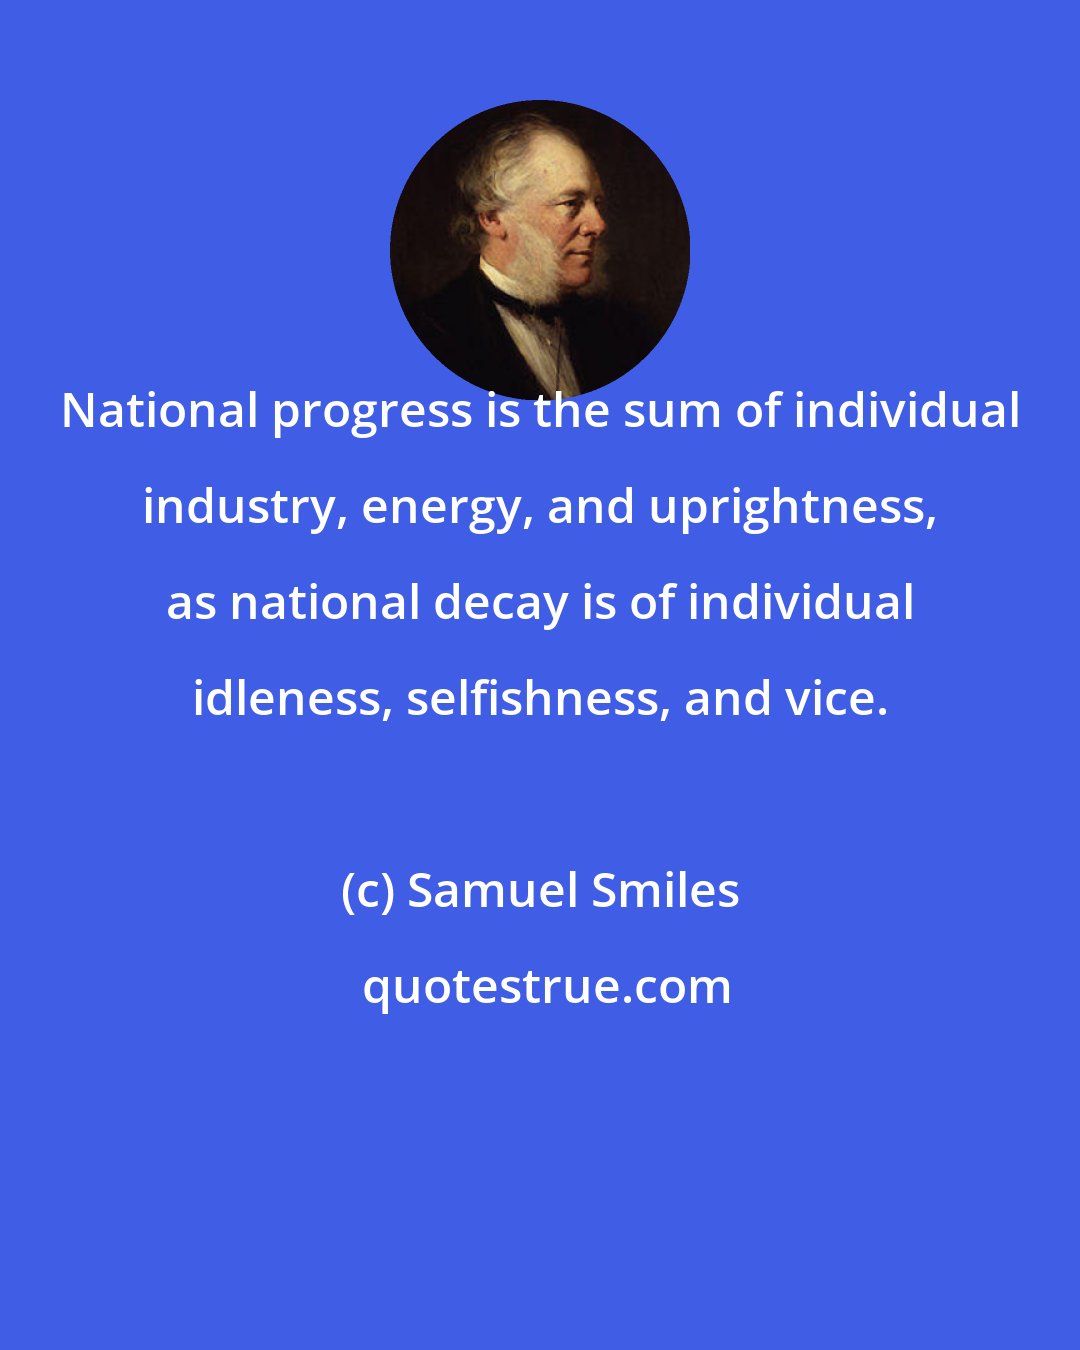 Samuel Smiles: National progress is the sum of individual industry, energy, and uprightness, as national decay is of individual idleness, selfishness, and vice.